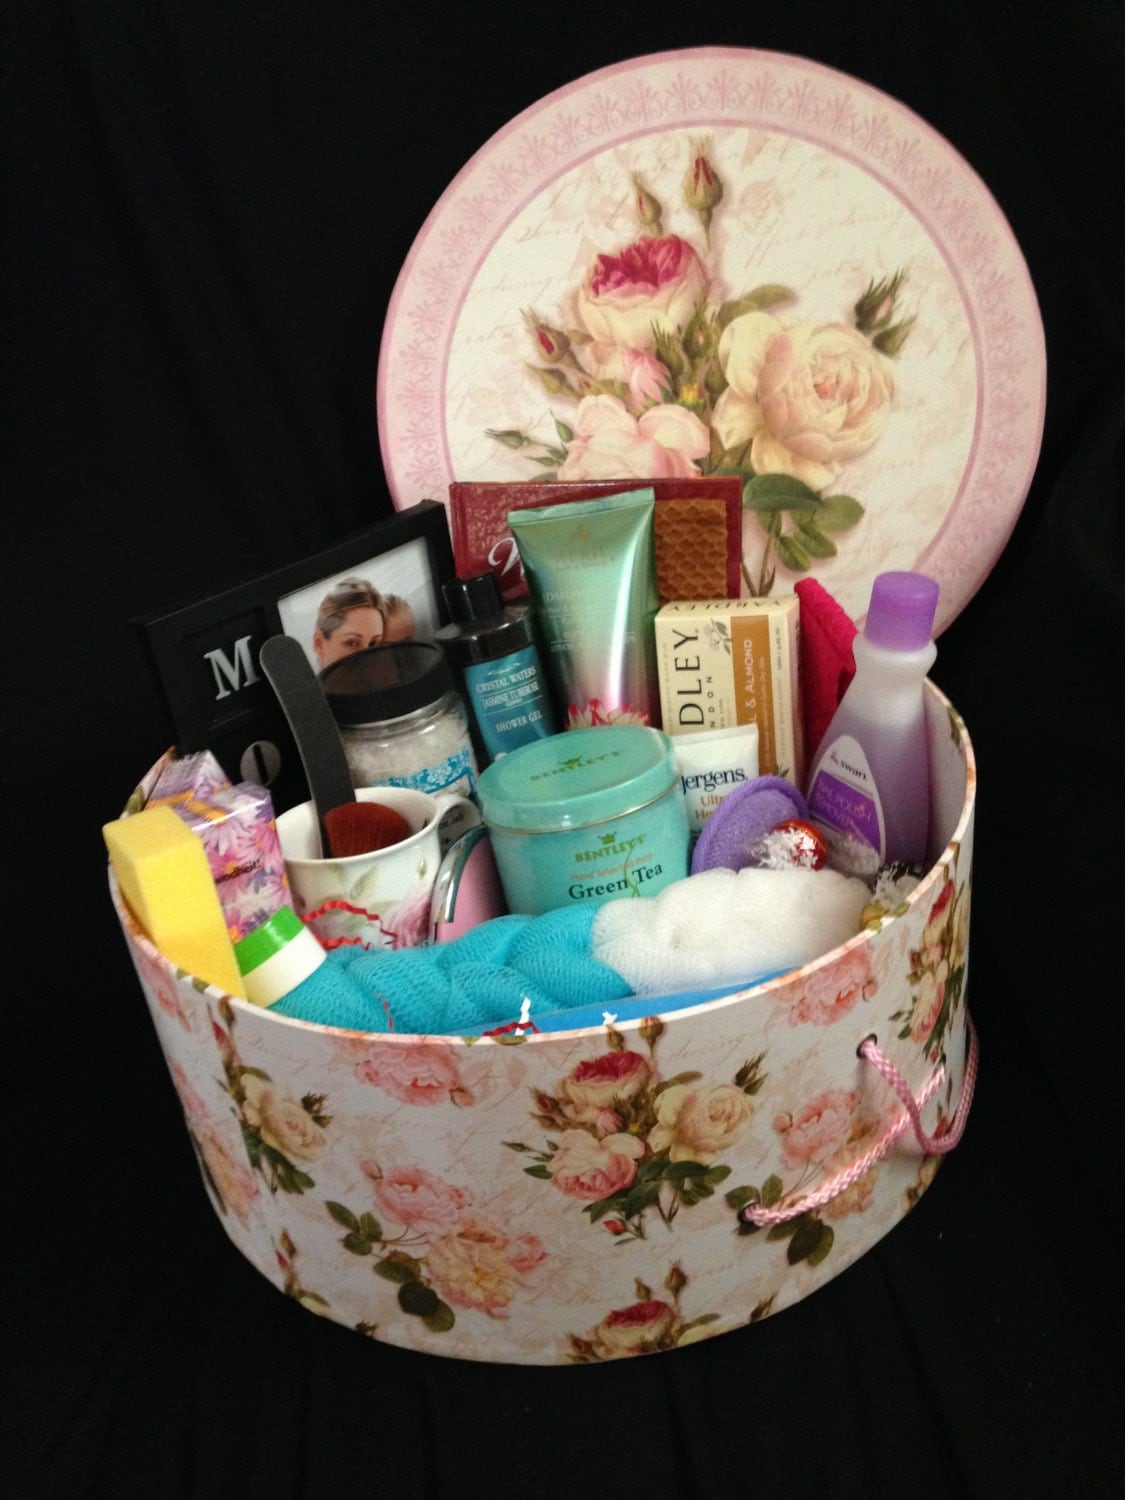 Gift Basket Ideas New Mom : The Gift Basket Every New Mom Needs - Fun